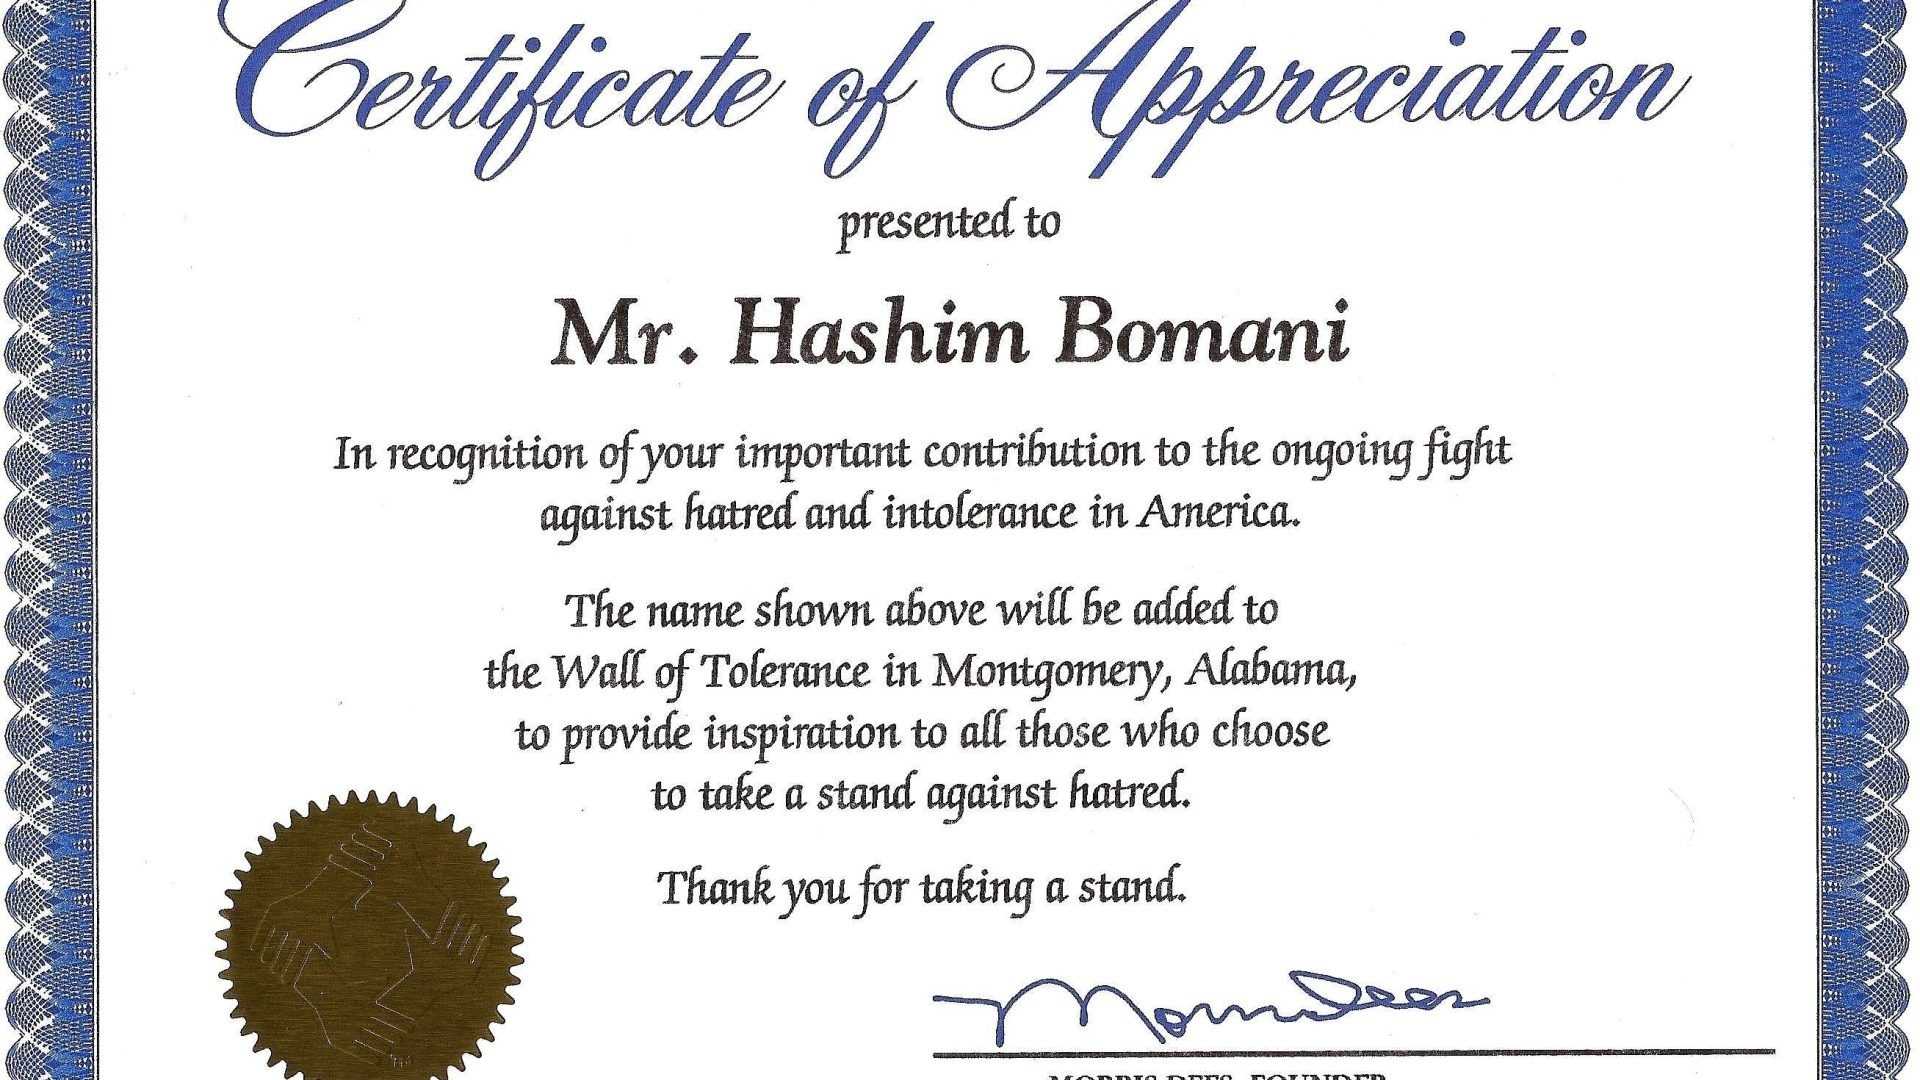 033 Certificate Of Appreciation Format Free Download Intended For Sample Certificate Of Recognition Template